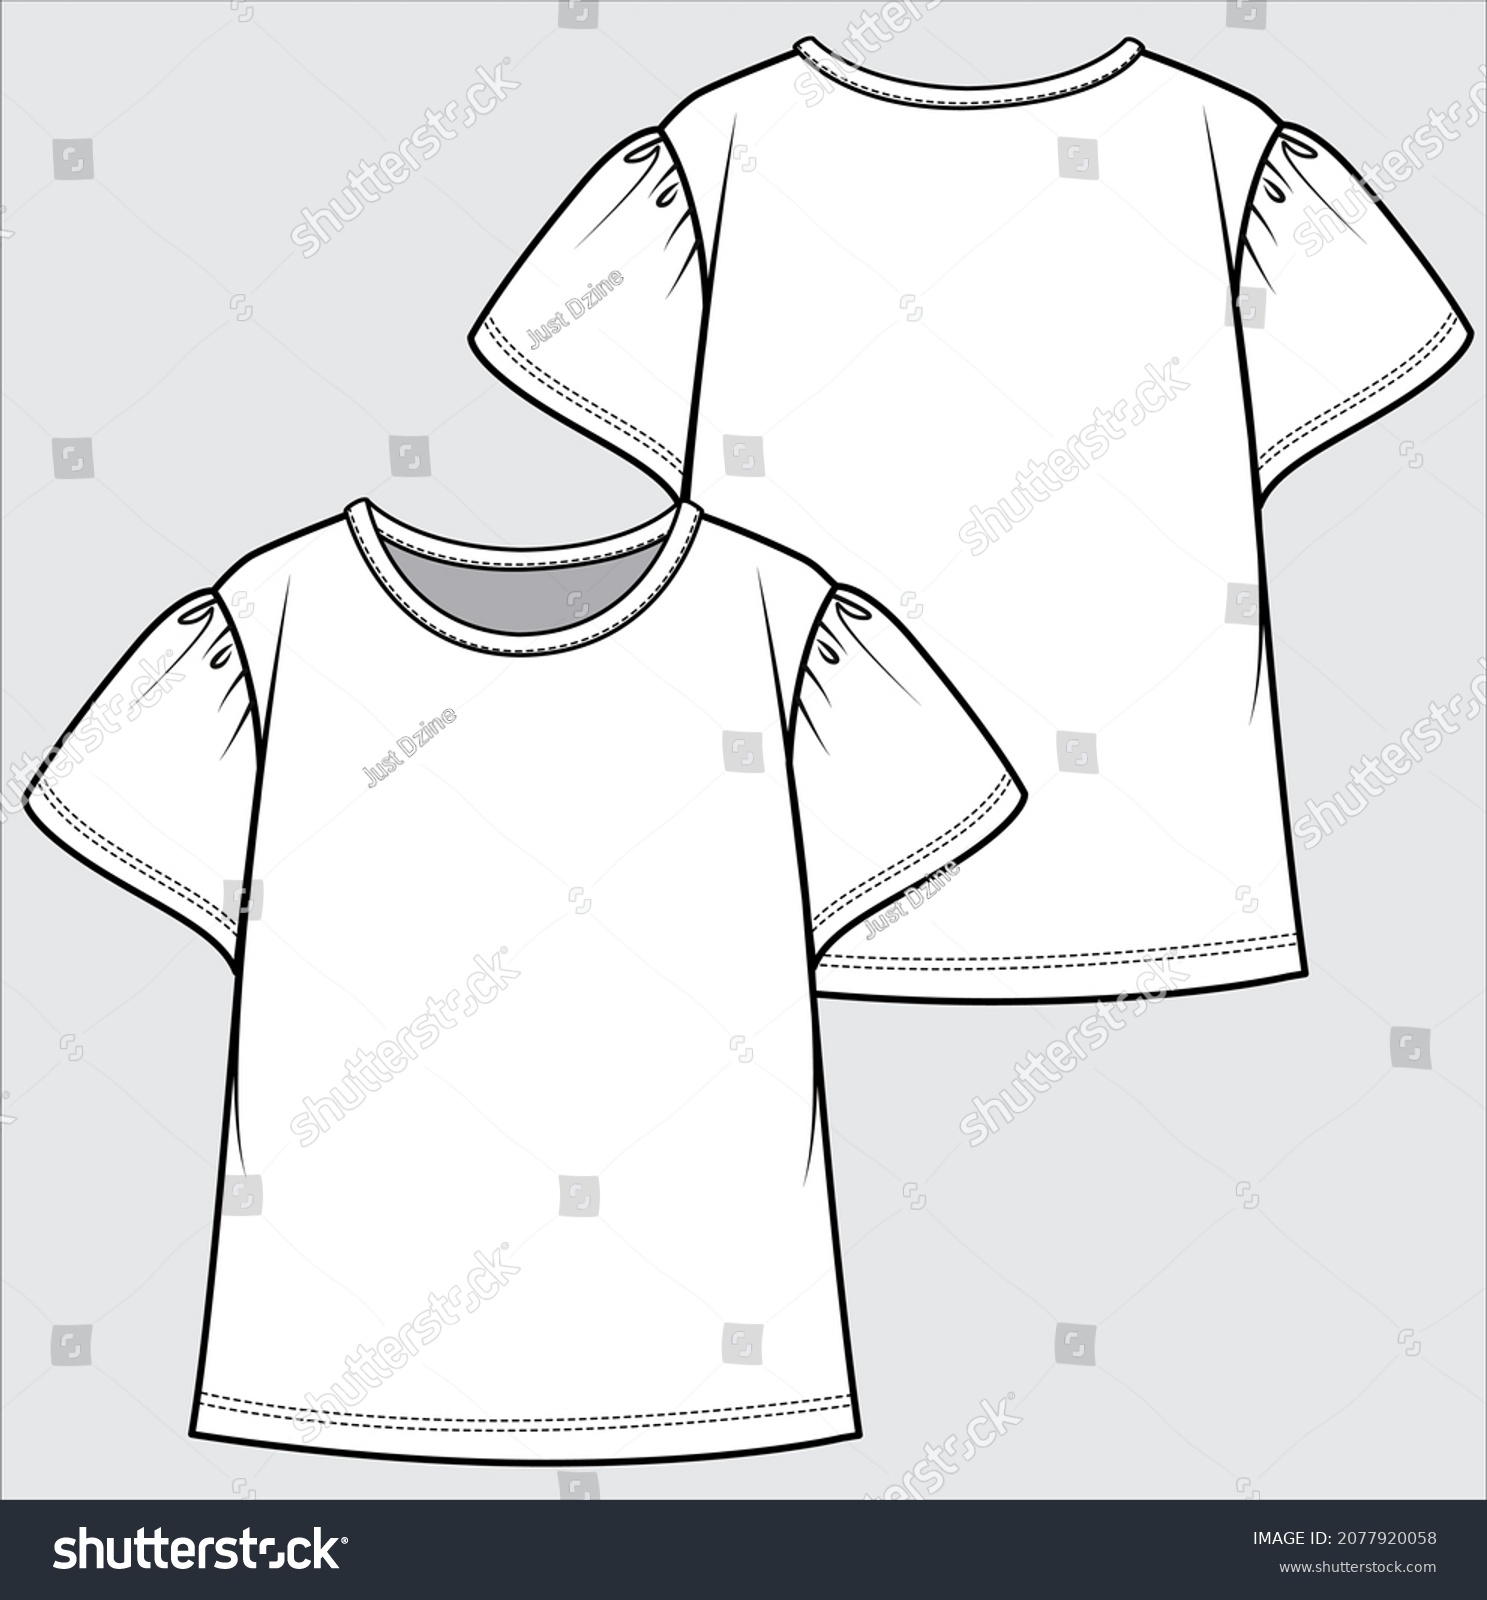 Front Back Technical Sketch Woven Top Stock Vector (Royalty Free ...